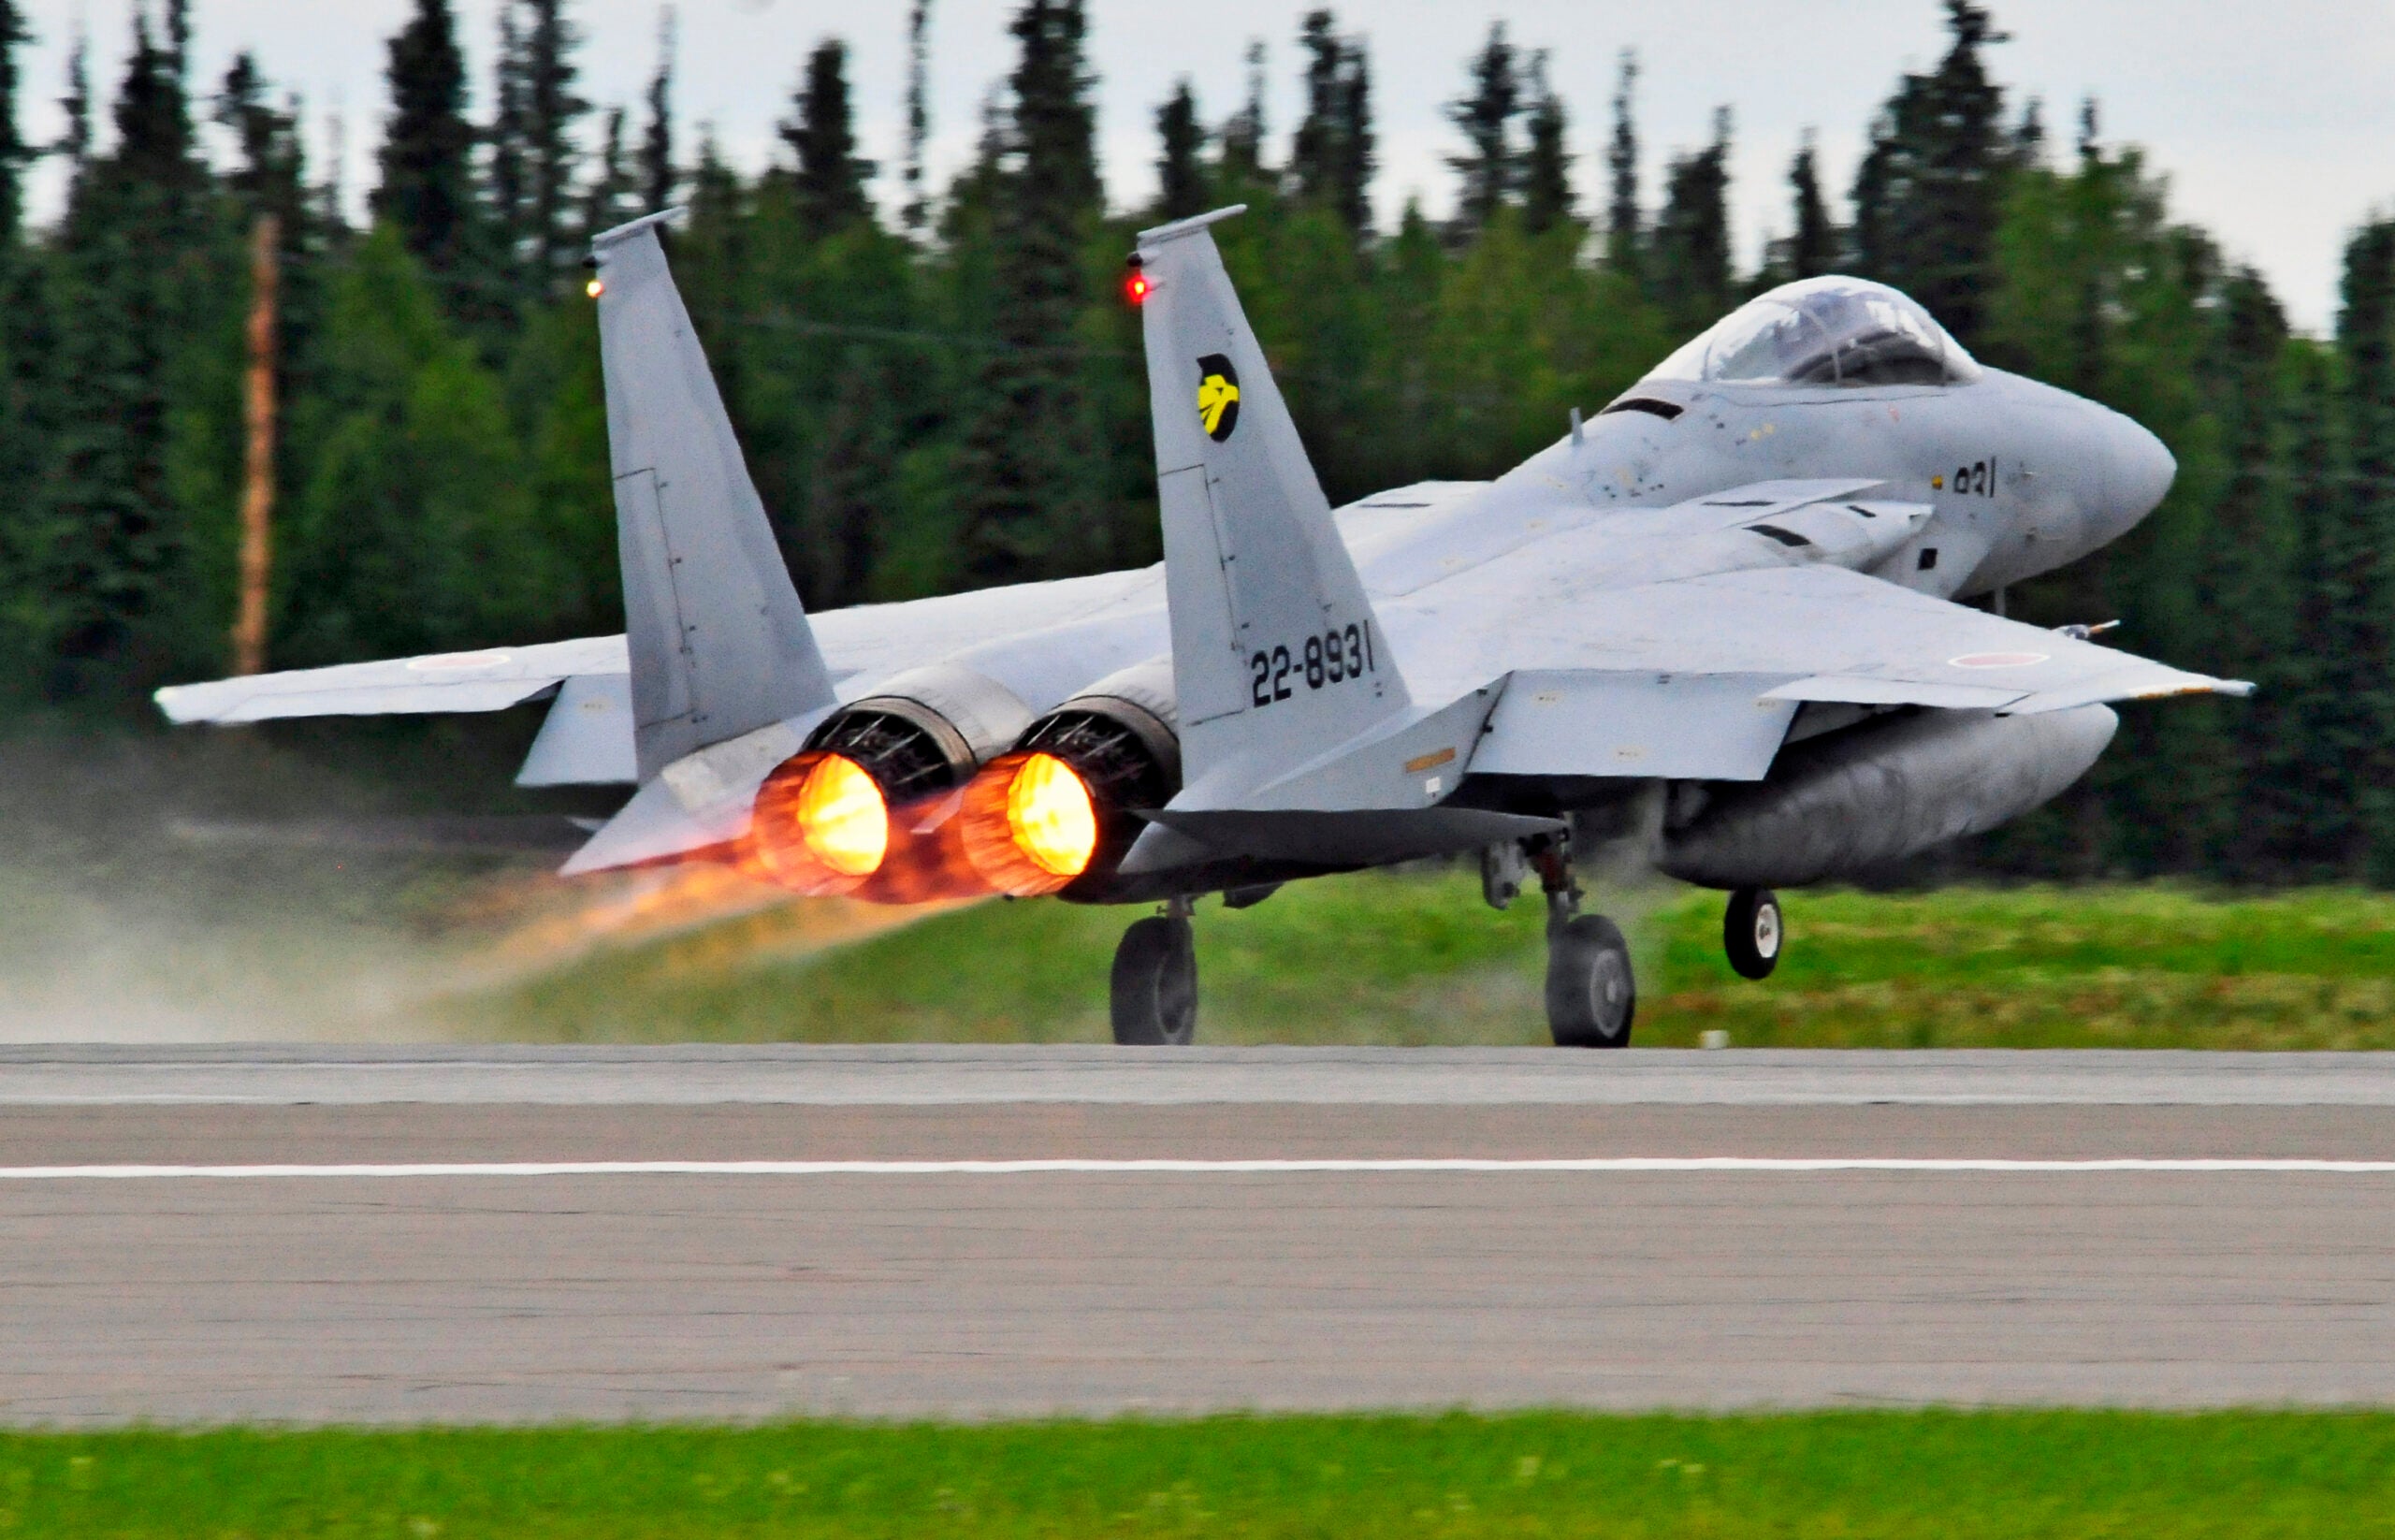 An F-15 Eagle fighter jet launches from the runway during RED FLAG-Alaska 11-2 July 15, 2011, Eielson Air Force Base, Alaska.  The F-15 Eagle forms part of the Japan Air Self Defense Force fighter-interceptor aircraft inventory used to engage hostile aircraft. (U.S. Air Force photo by/Staff Sgt. Miguel Lara)